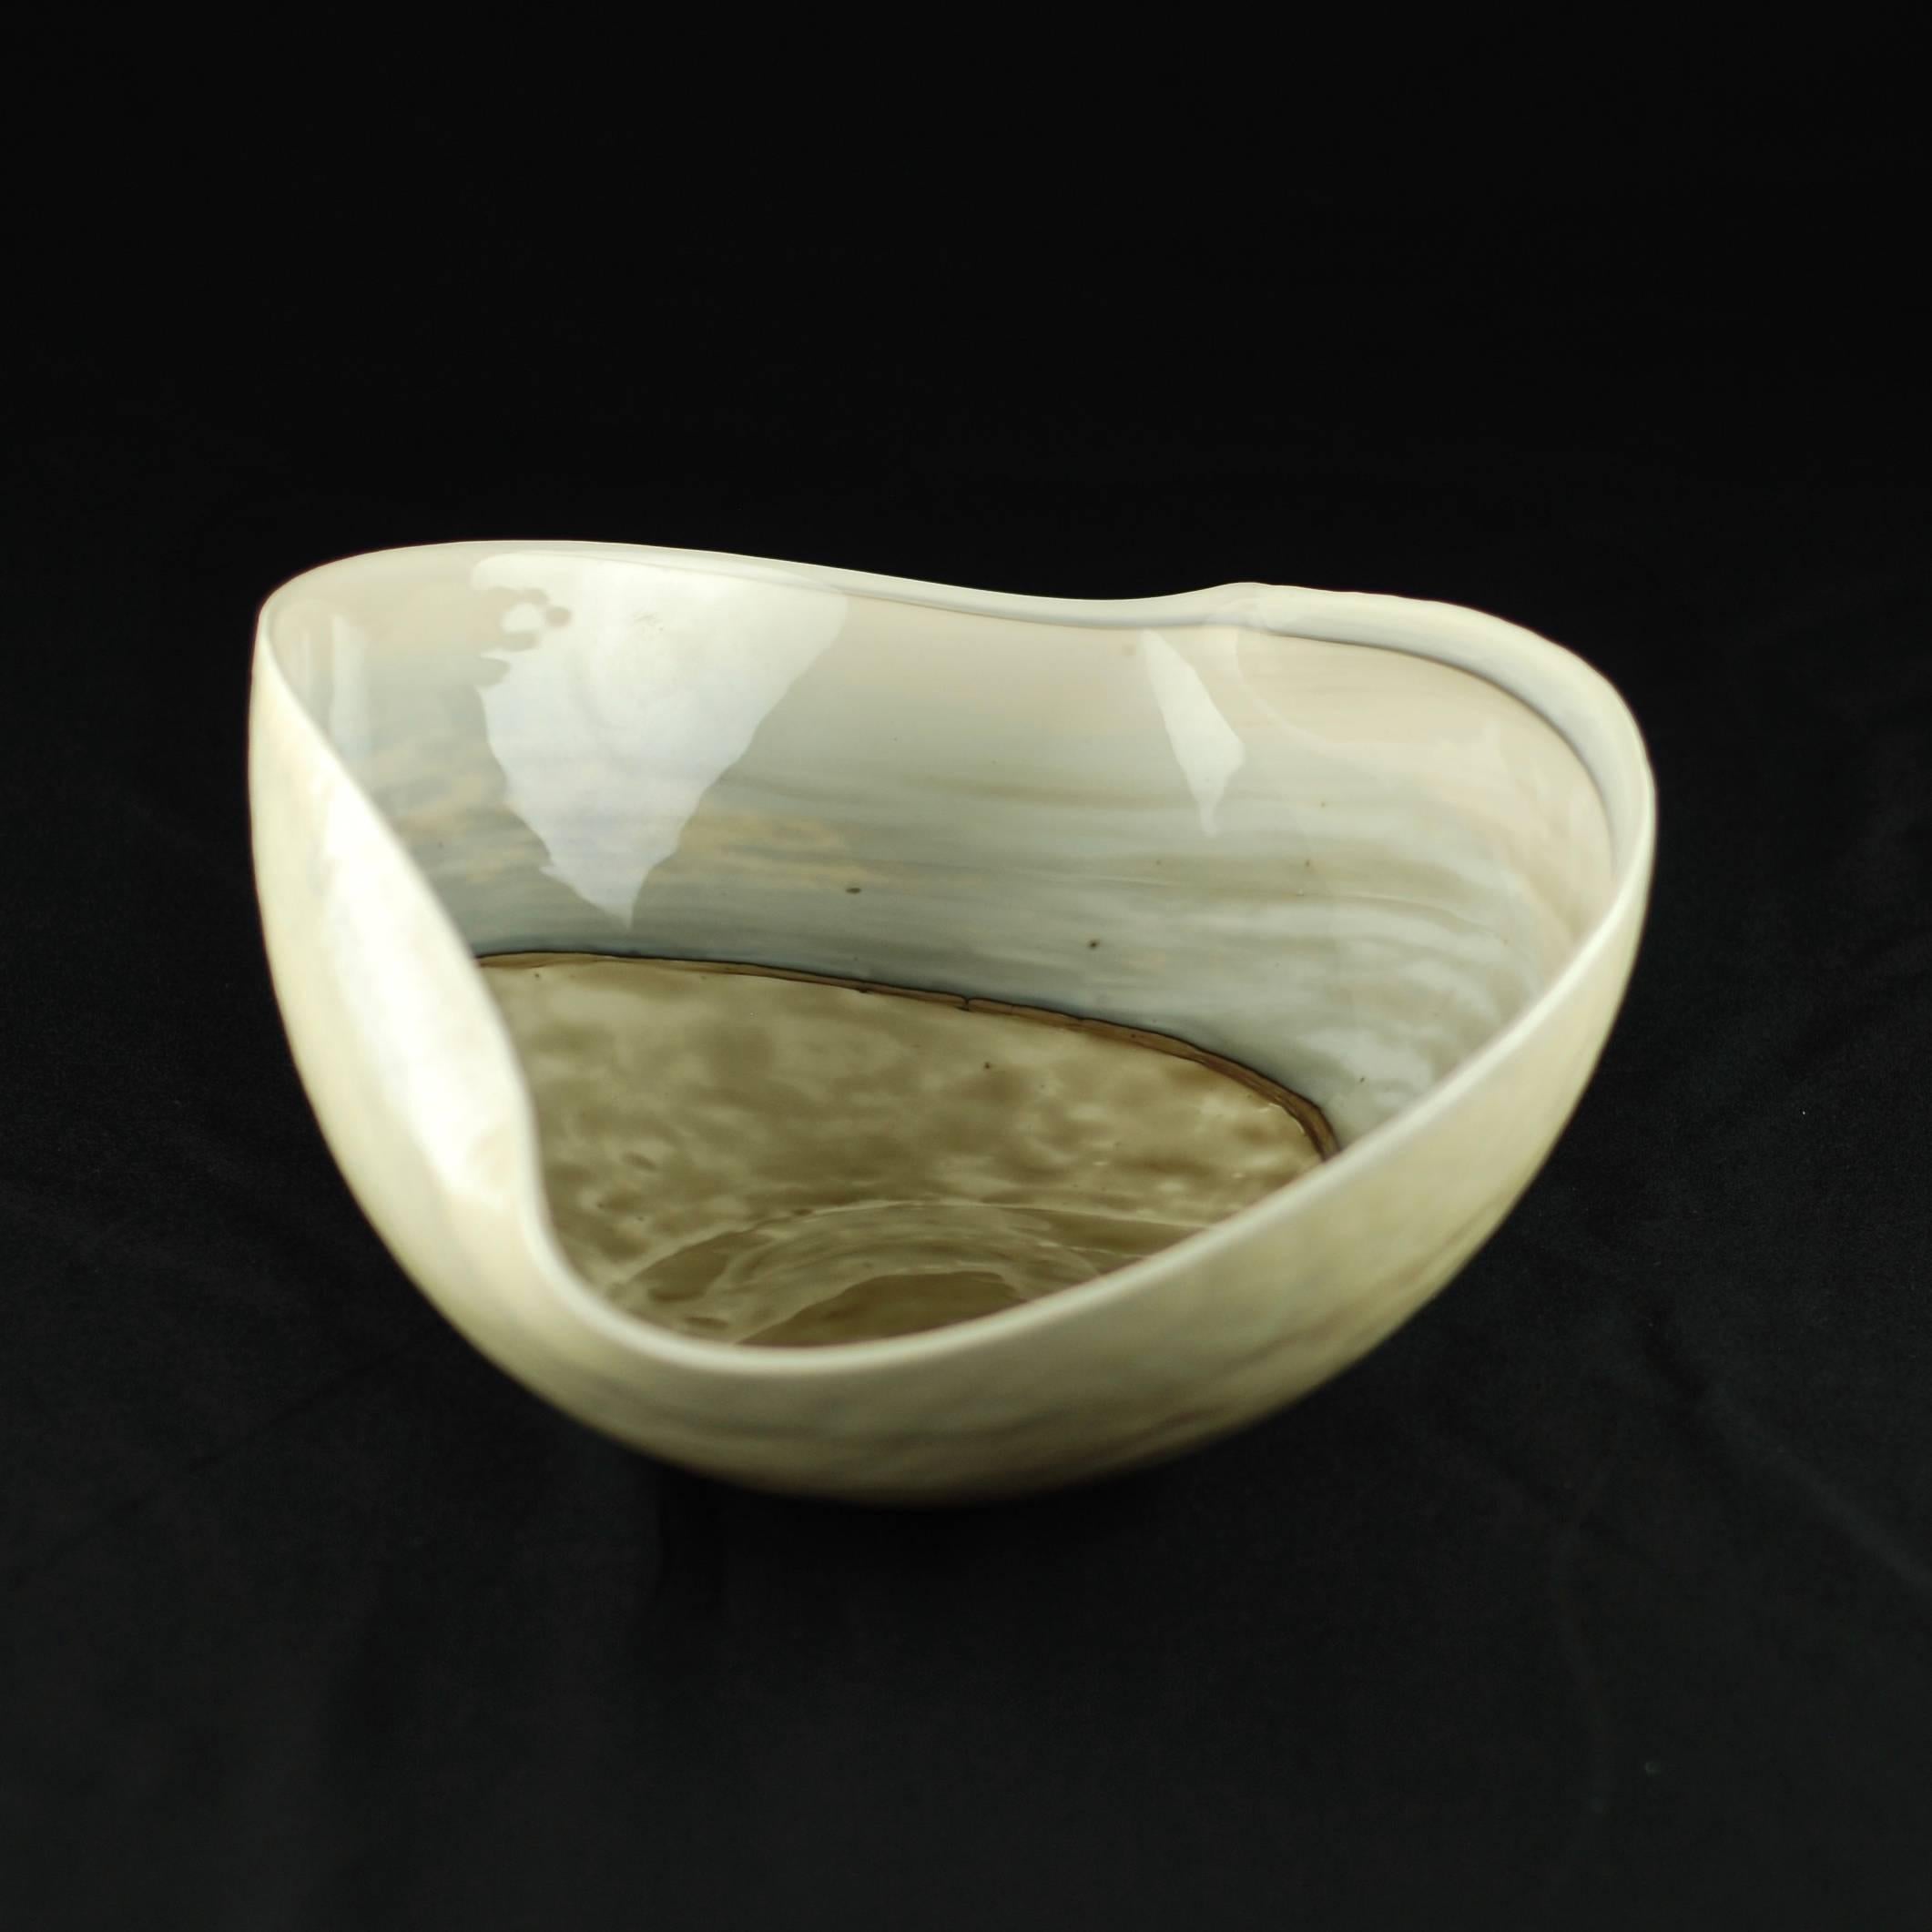 This large art glass centerpiece bowl has a freeform ovoid shape with folded sides and features an abstract swirling pattern. The piece has been executed in a neutral palette which includes shades of cream, tan, brown and blue/gray. The interior of